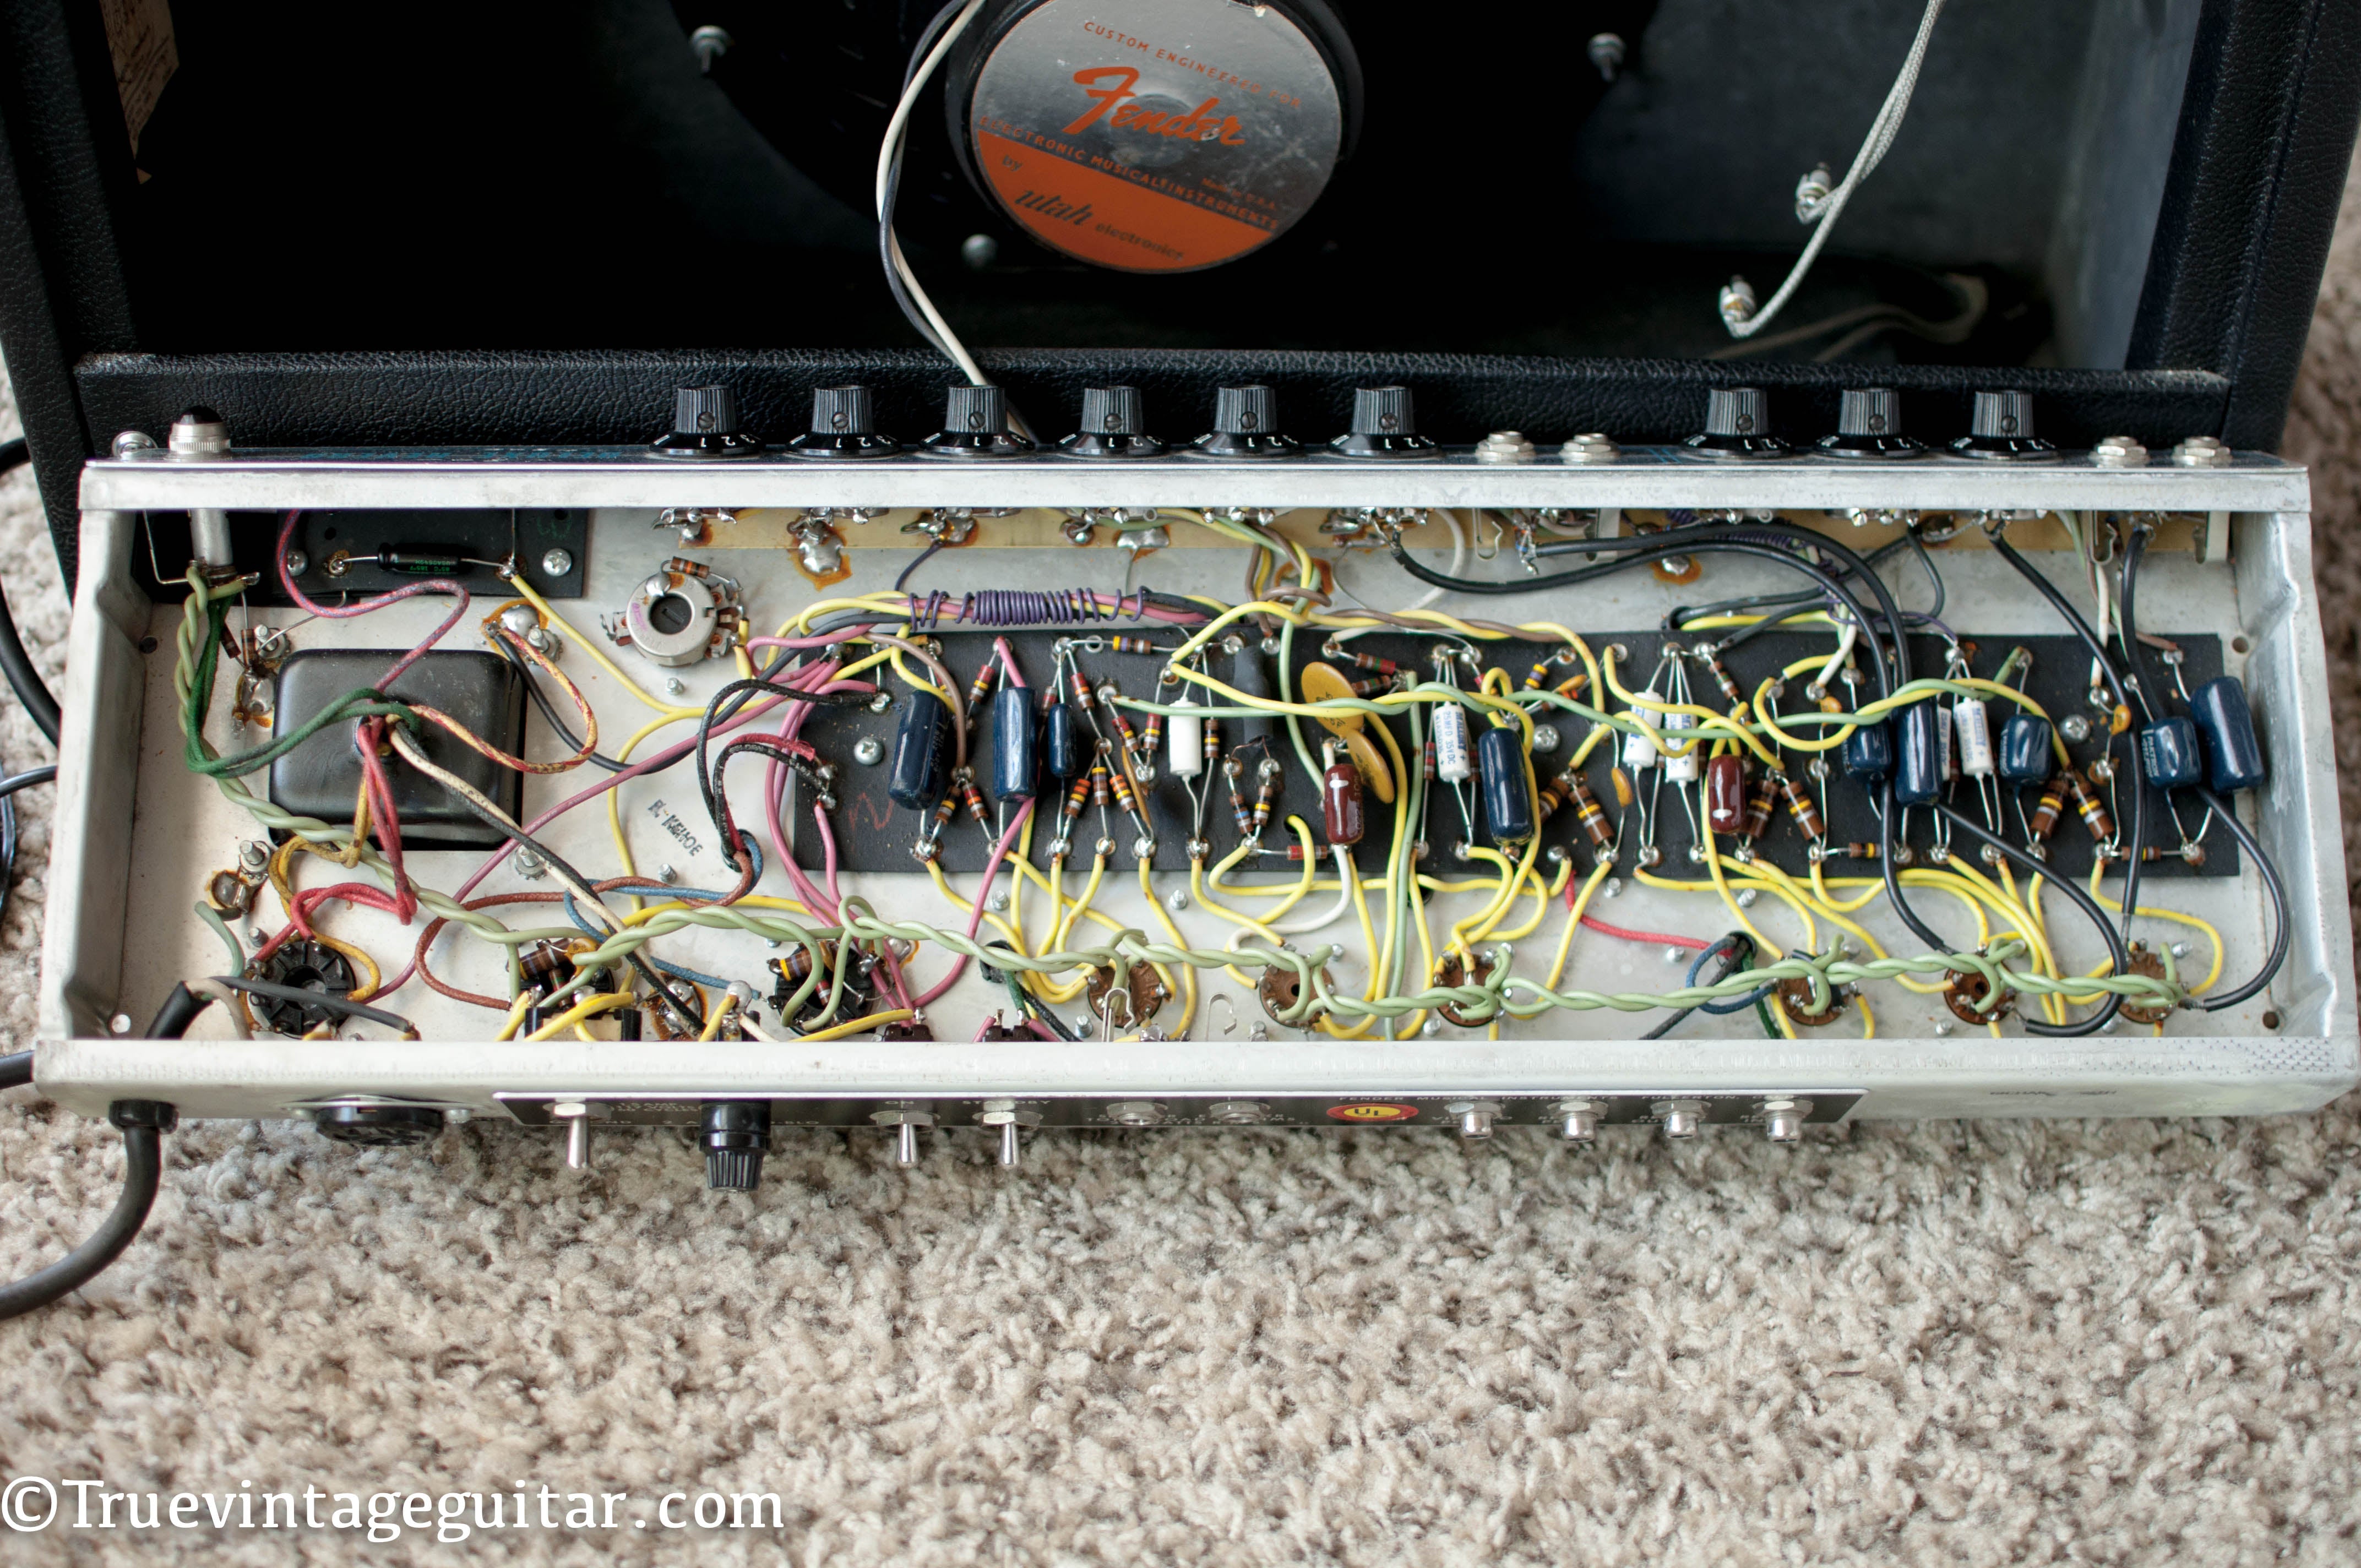 hand wired circuit board 1972 Fender Deluxe Reverb amp